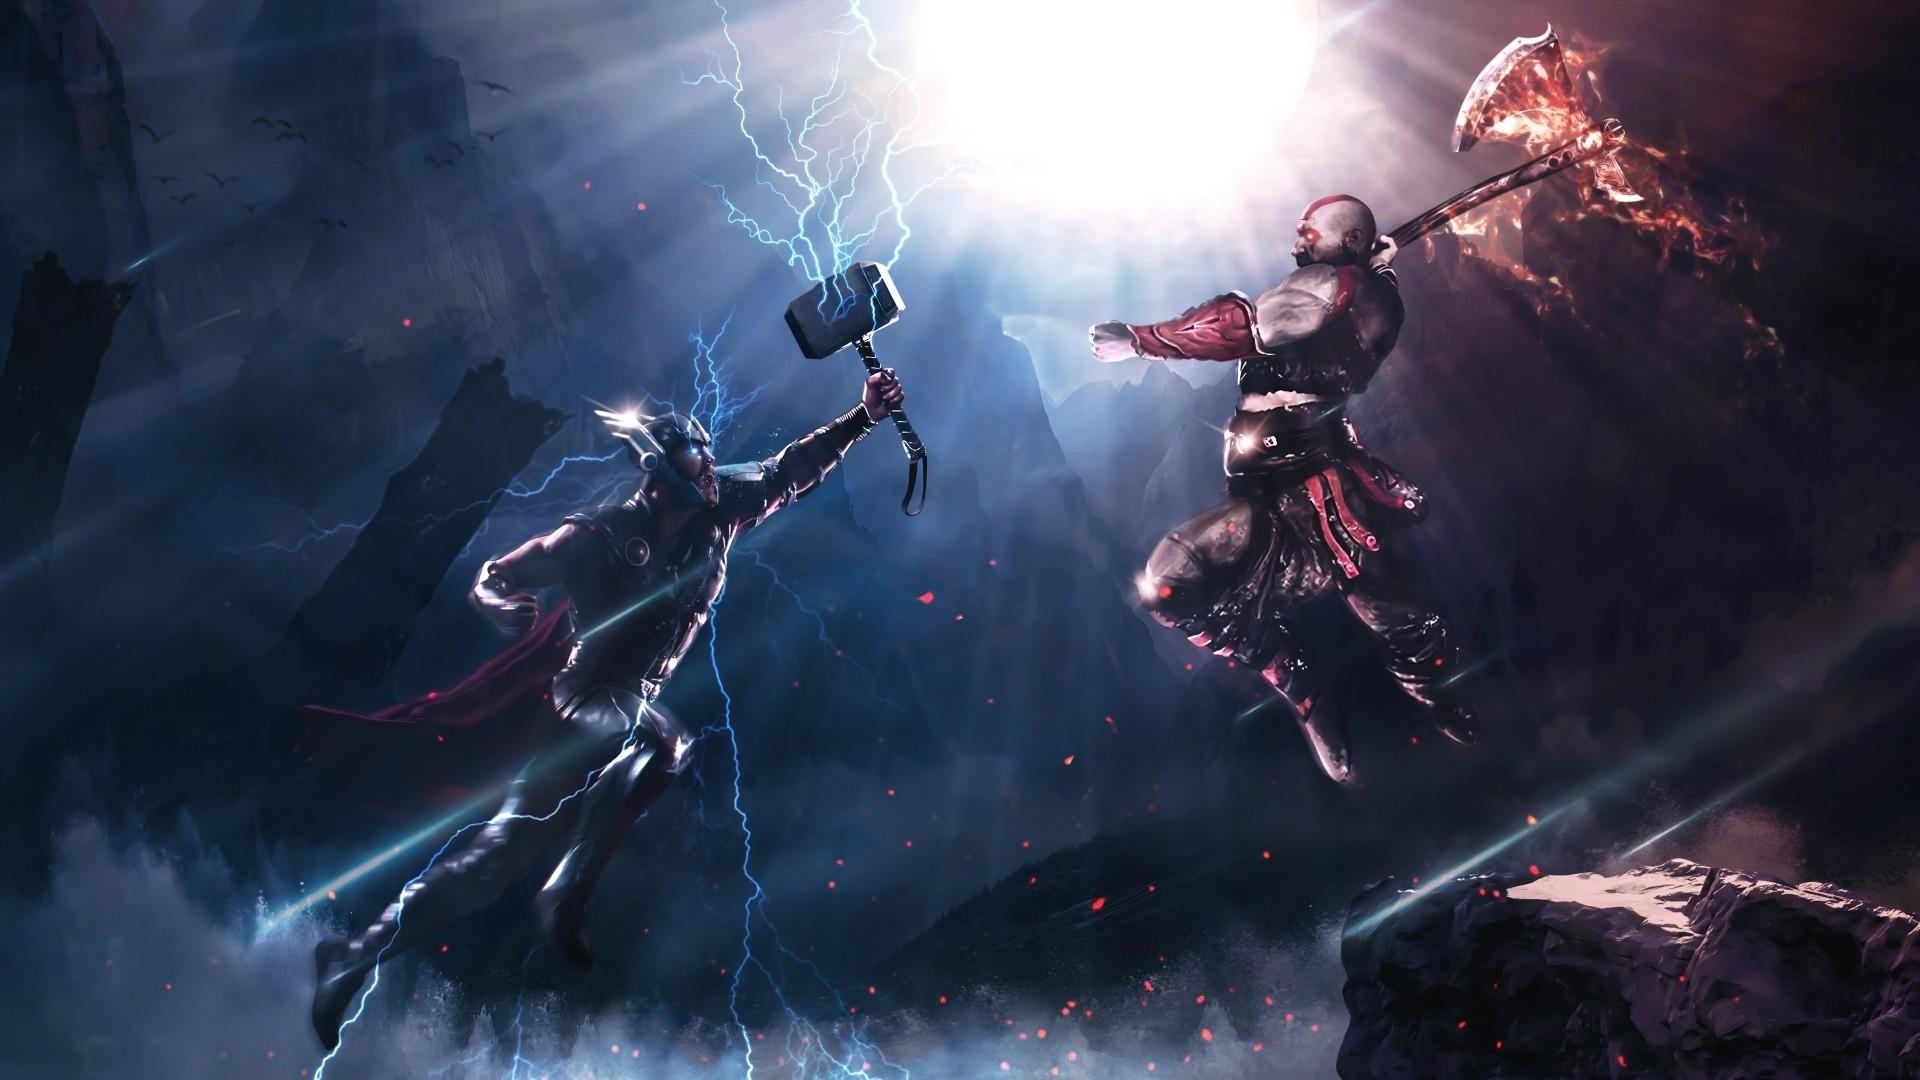 Download 1920x1080 Kratos Vs Thor, Fight, Crossover